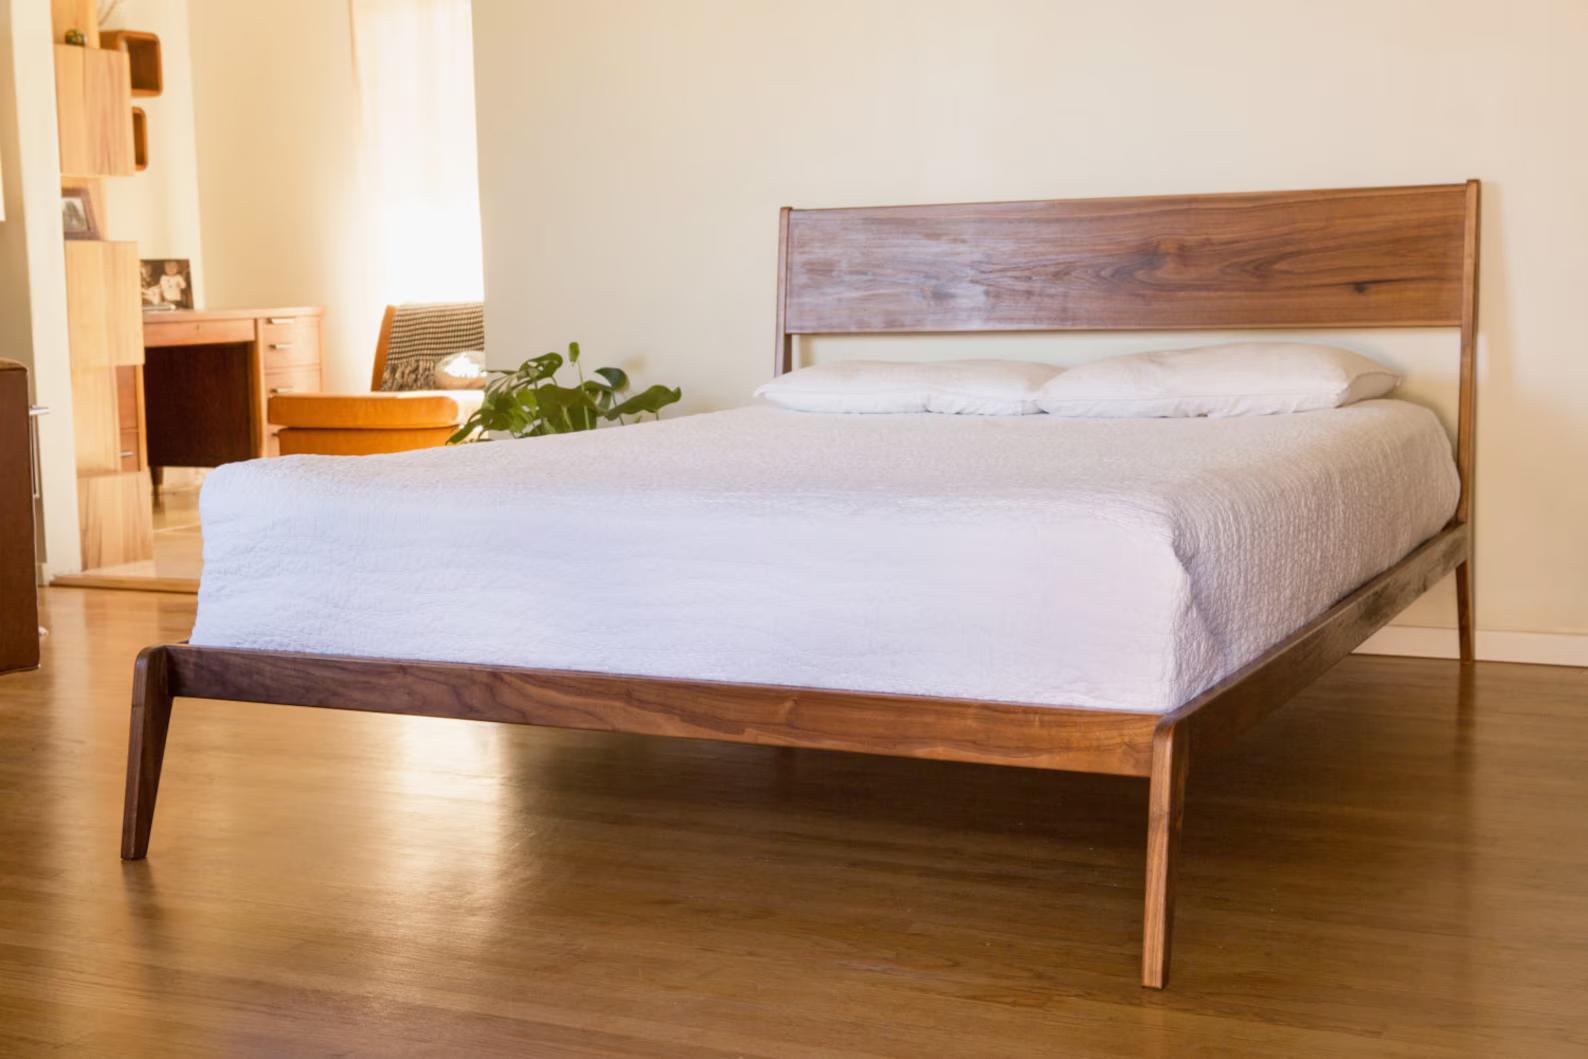 
The Lean bed features subtle curves that hearken to mid century modern design. The back legs are constructed with a bent lamination process that allows the grain of the wood to follow the curve of the leg, resulting in a splayed leg and a canted